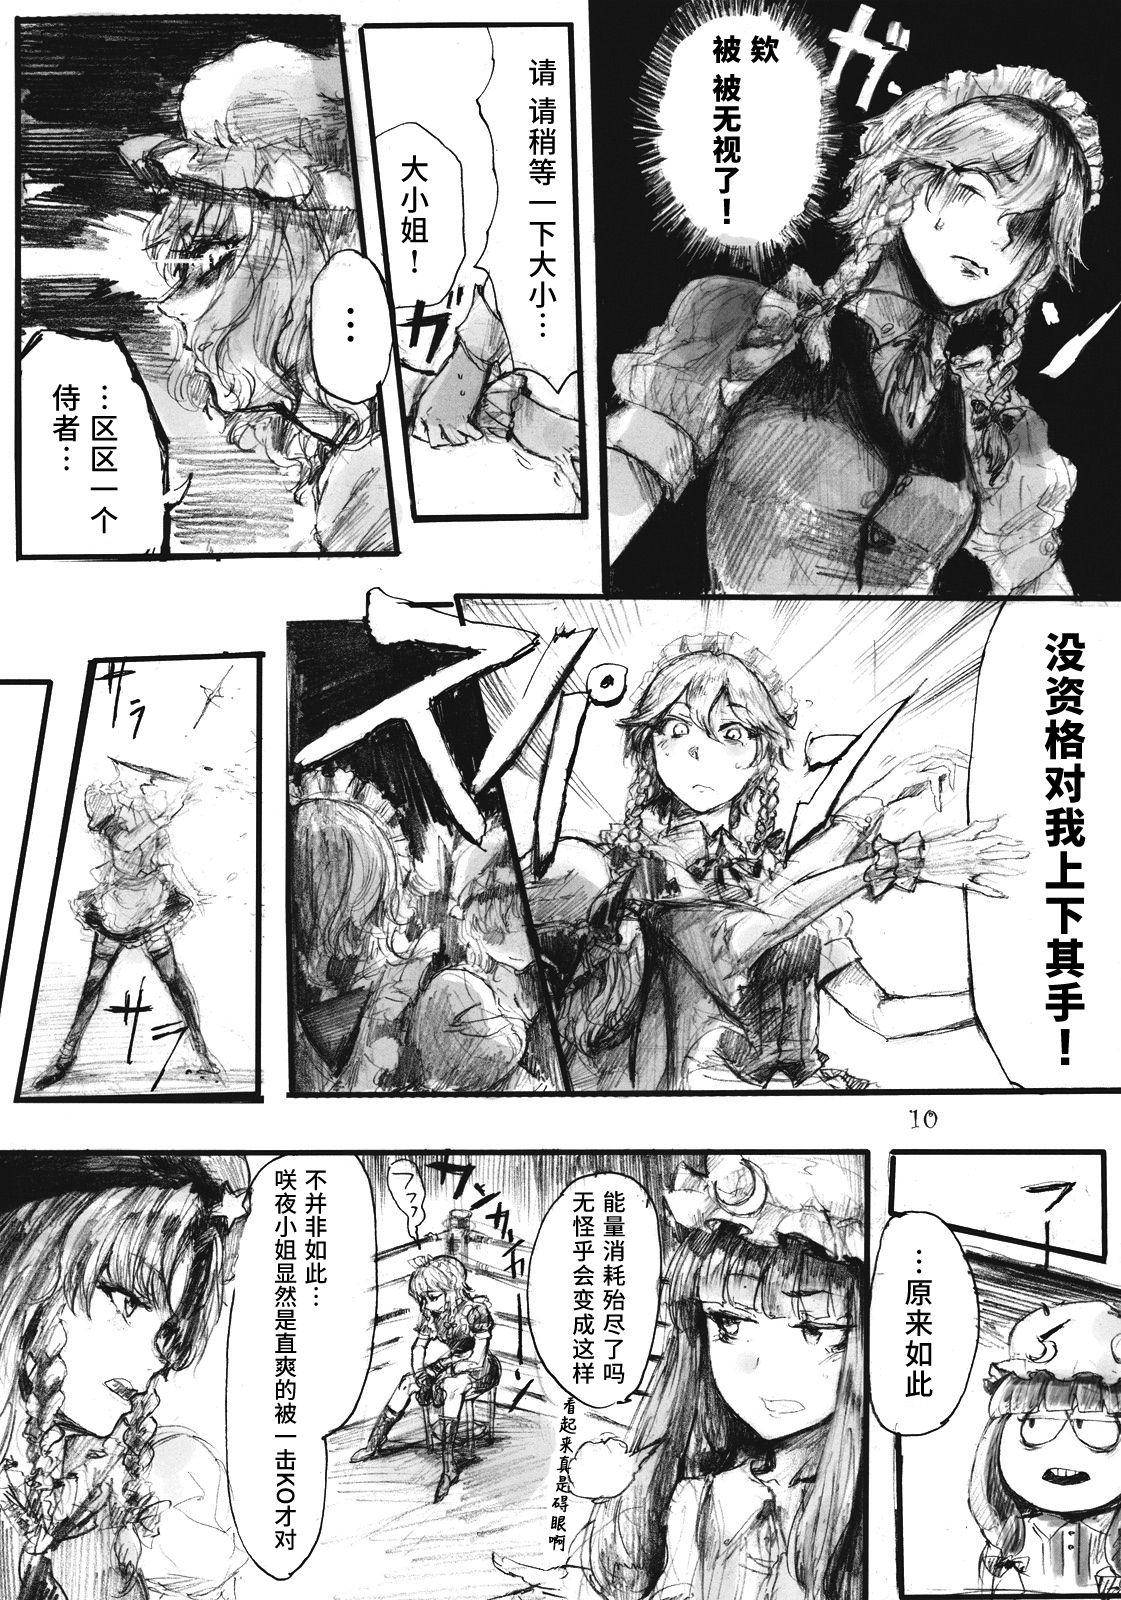 Girls Getting Fucked SEMPER EADEM - Touhou project Barely 18 Porn - Page 10